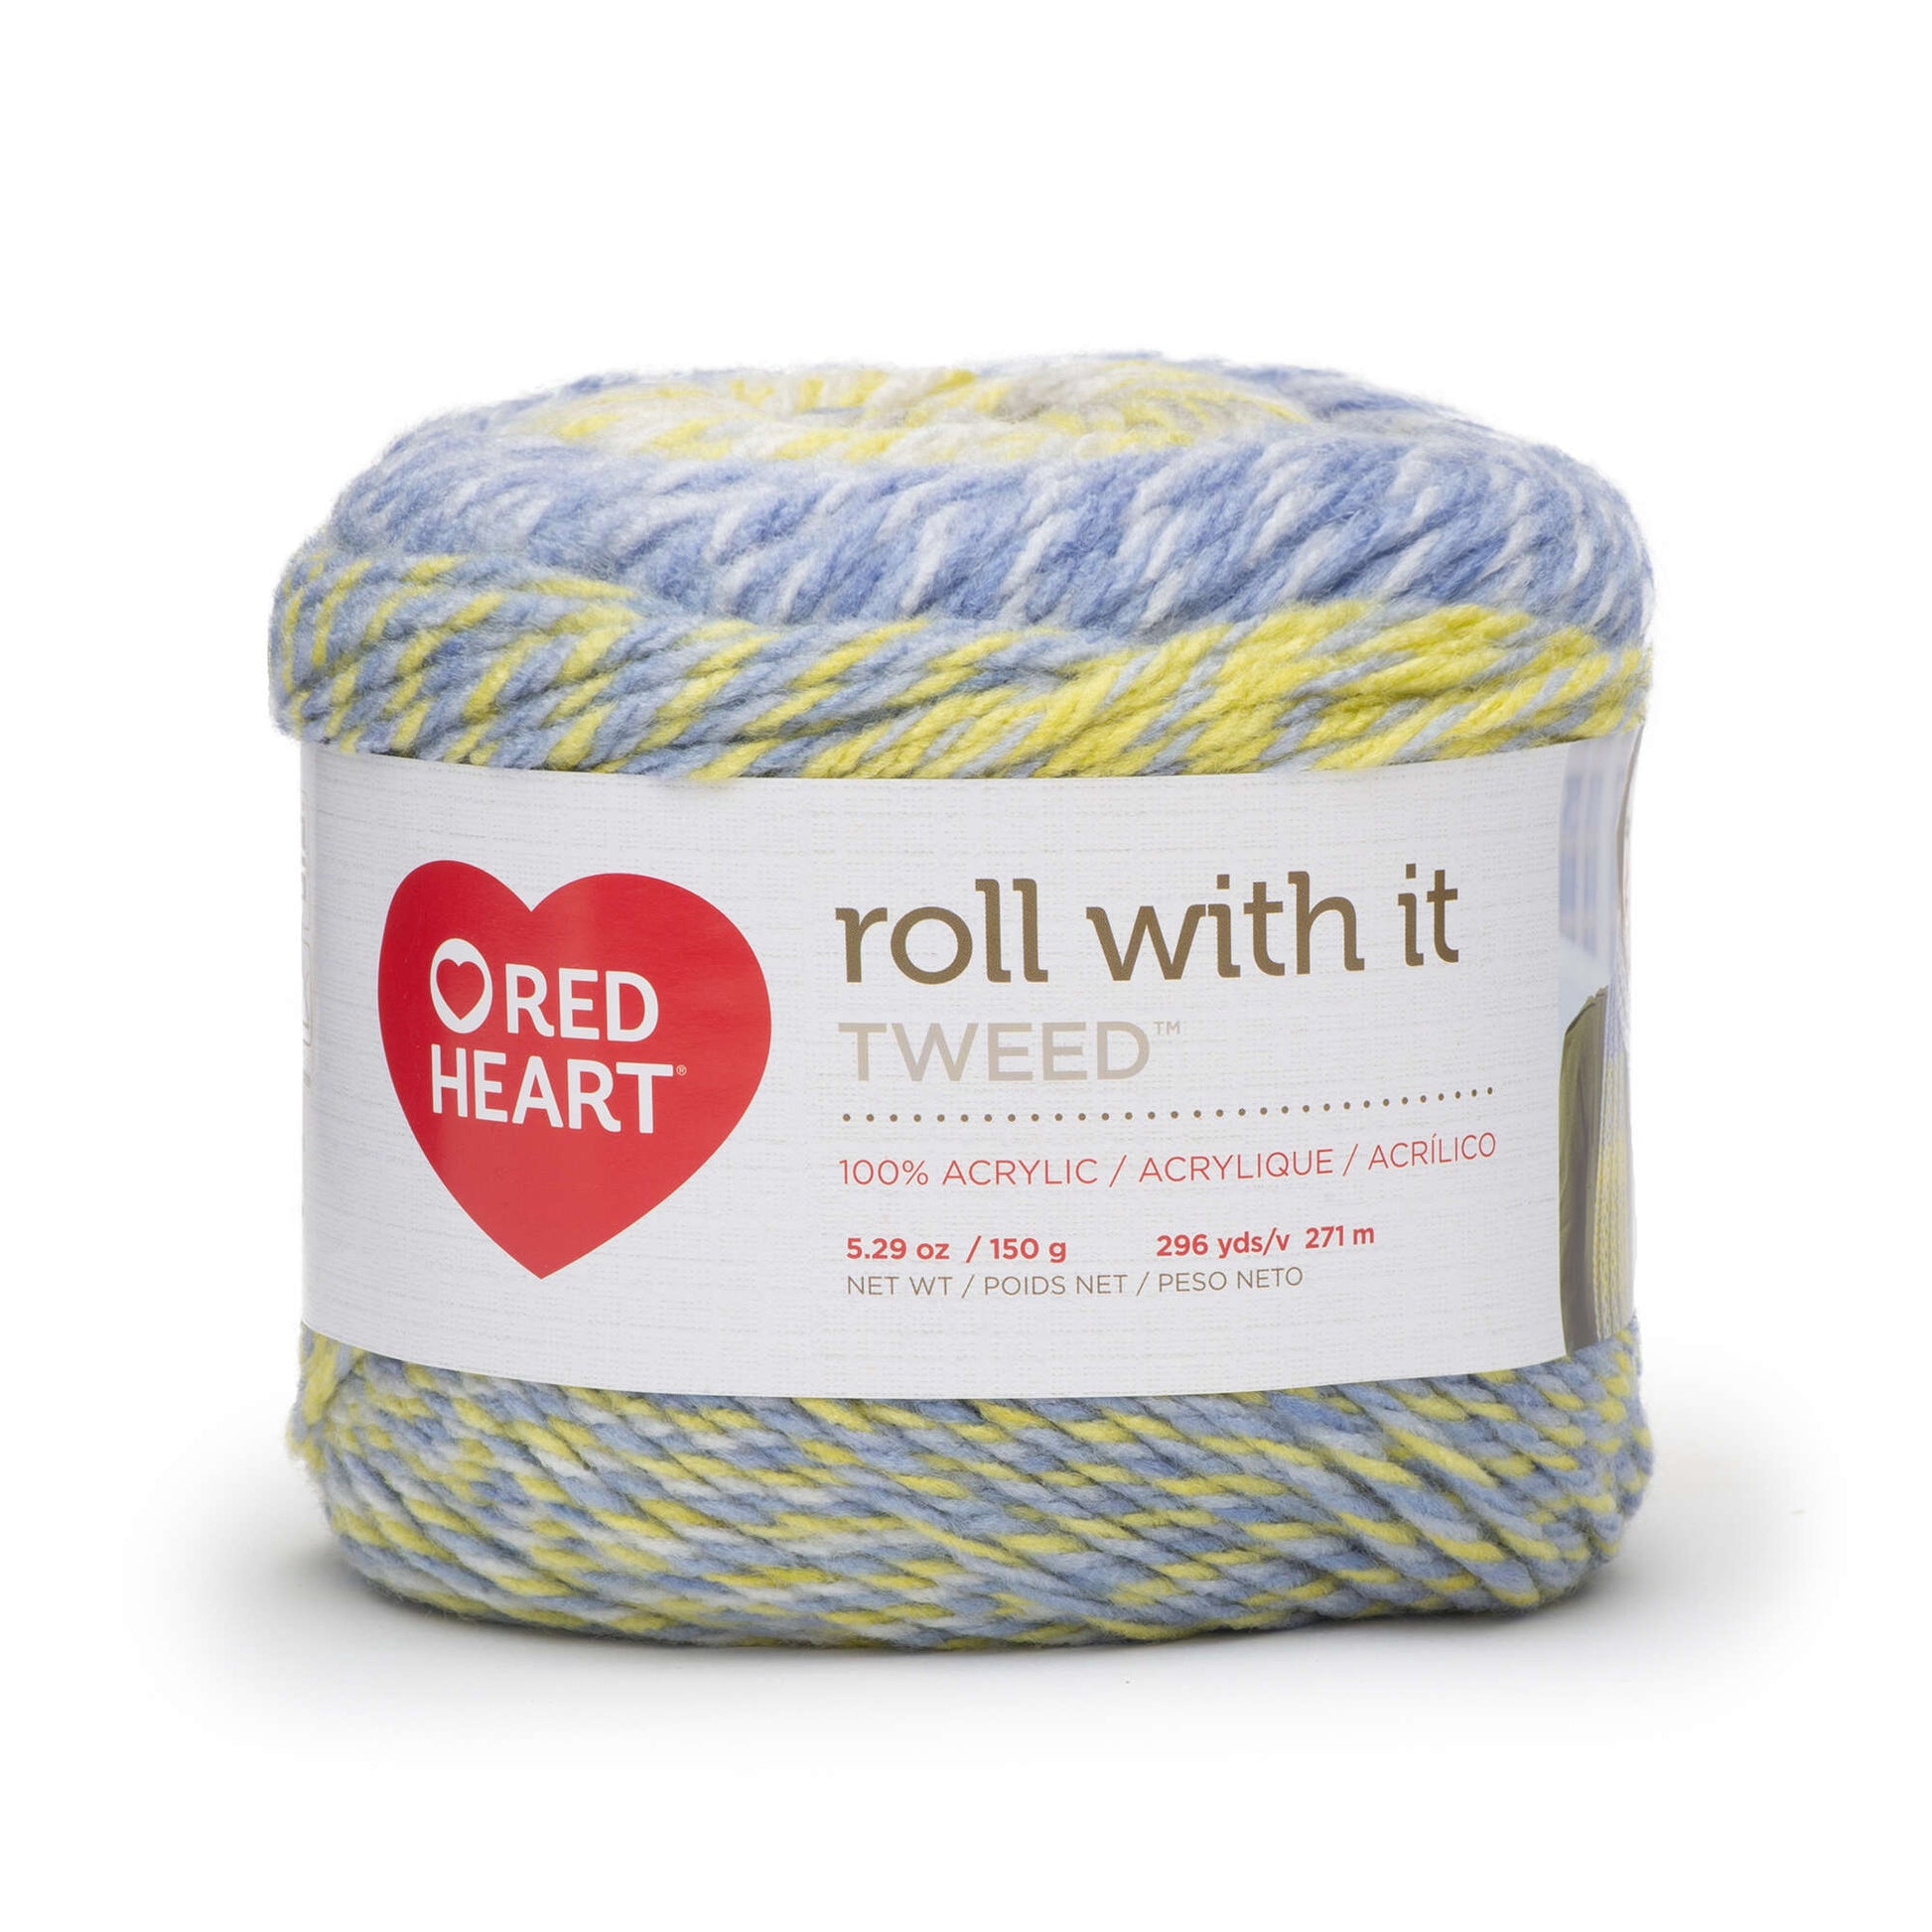 Red Heart Roll With It Tweed Yarn - Clearance shades Lilac Breeze